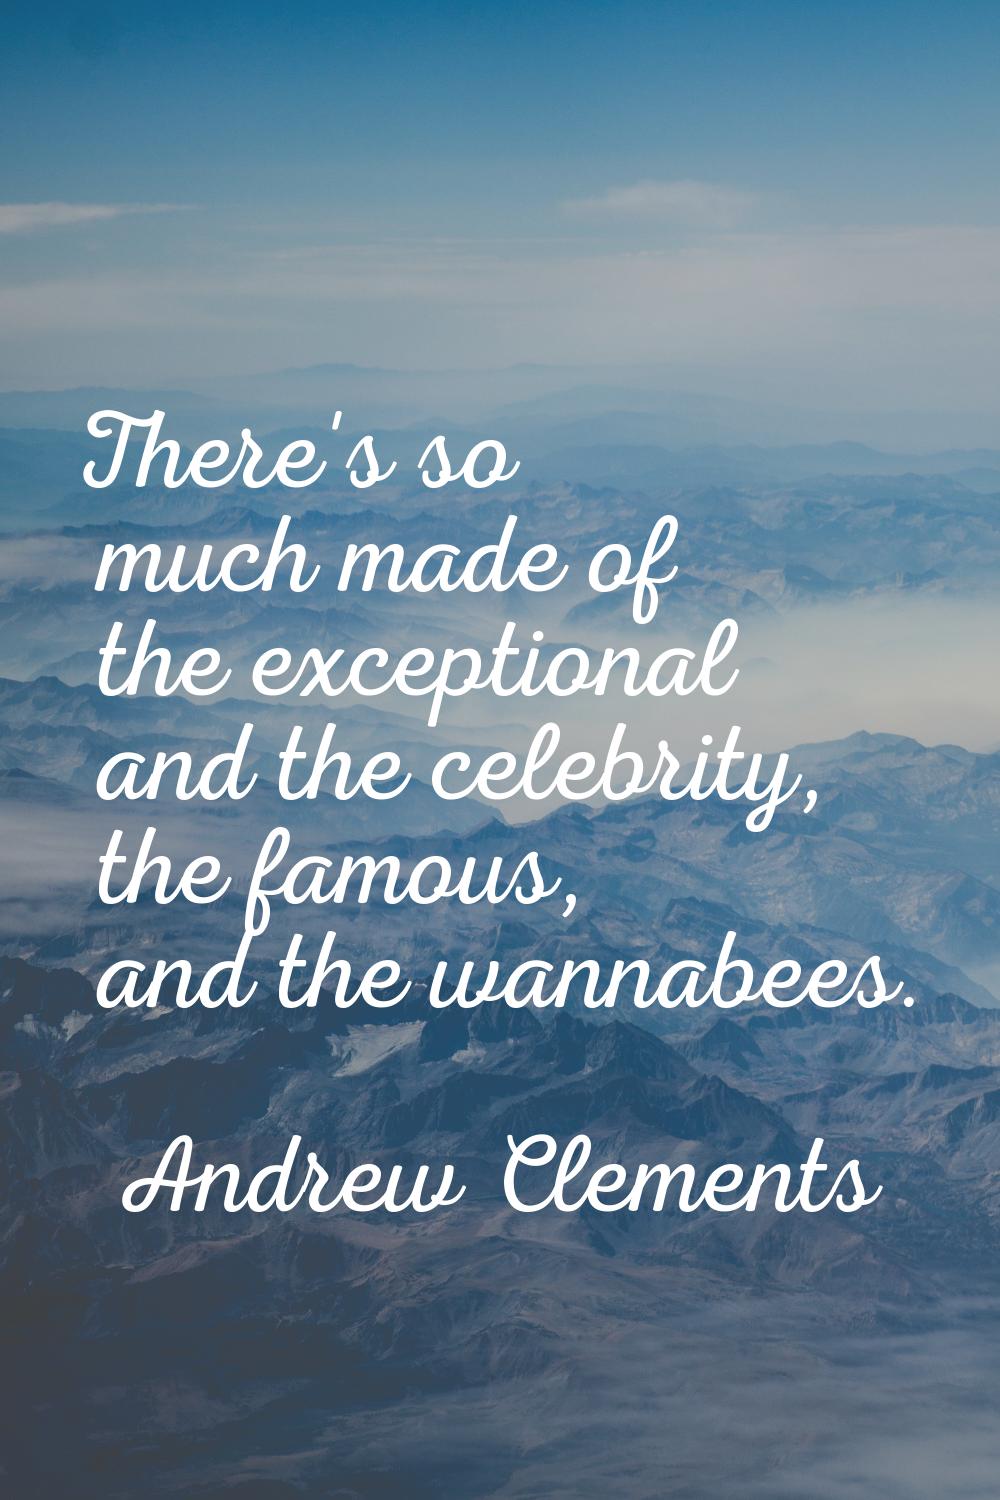 There's so much made of the exceptional and the celebrity, the famous, and the wannabees.